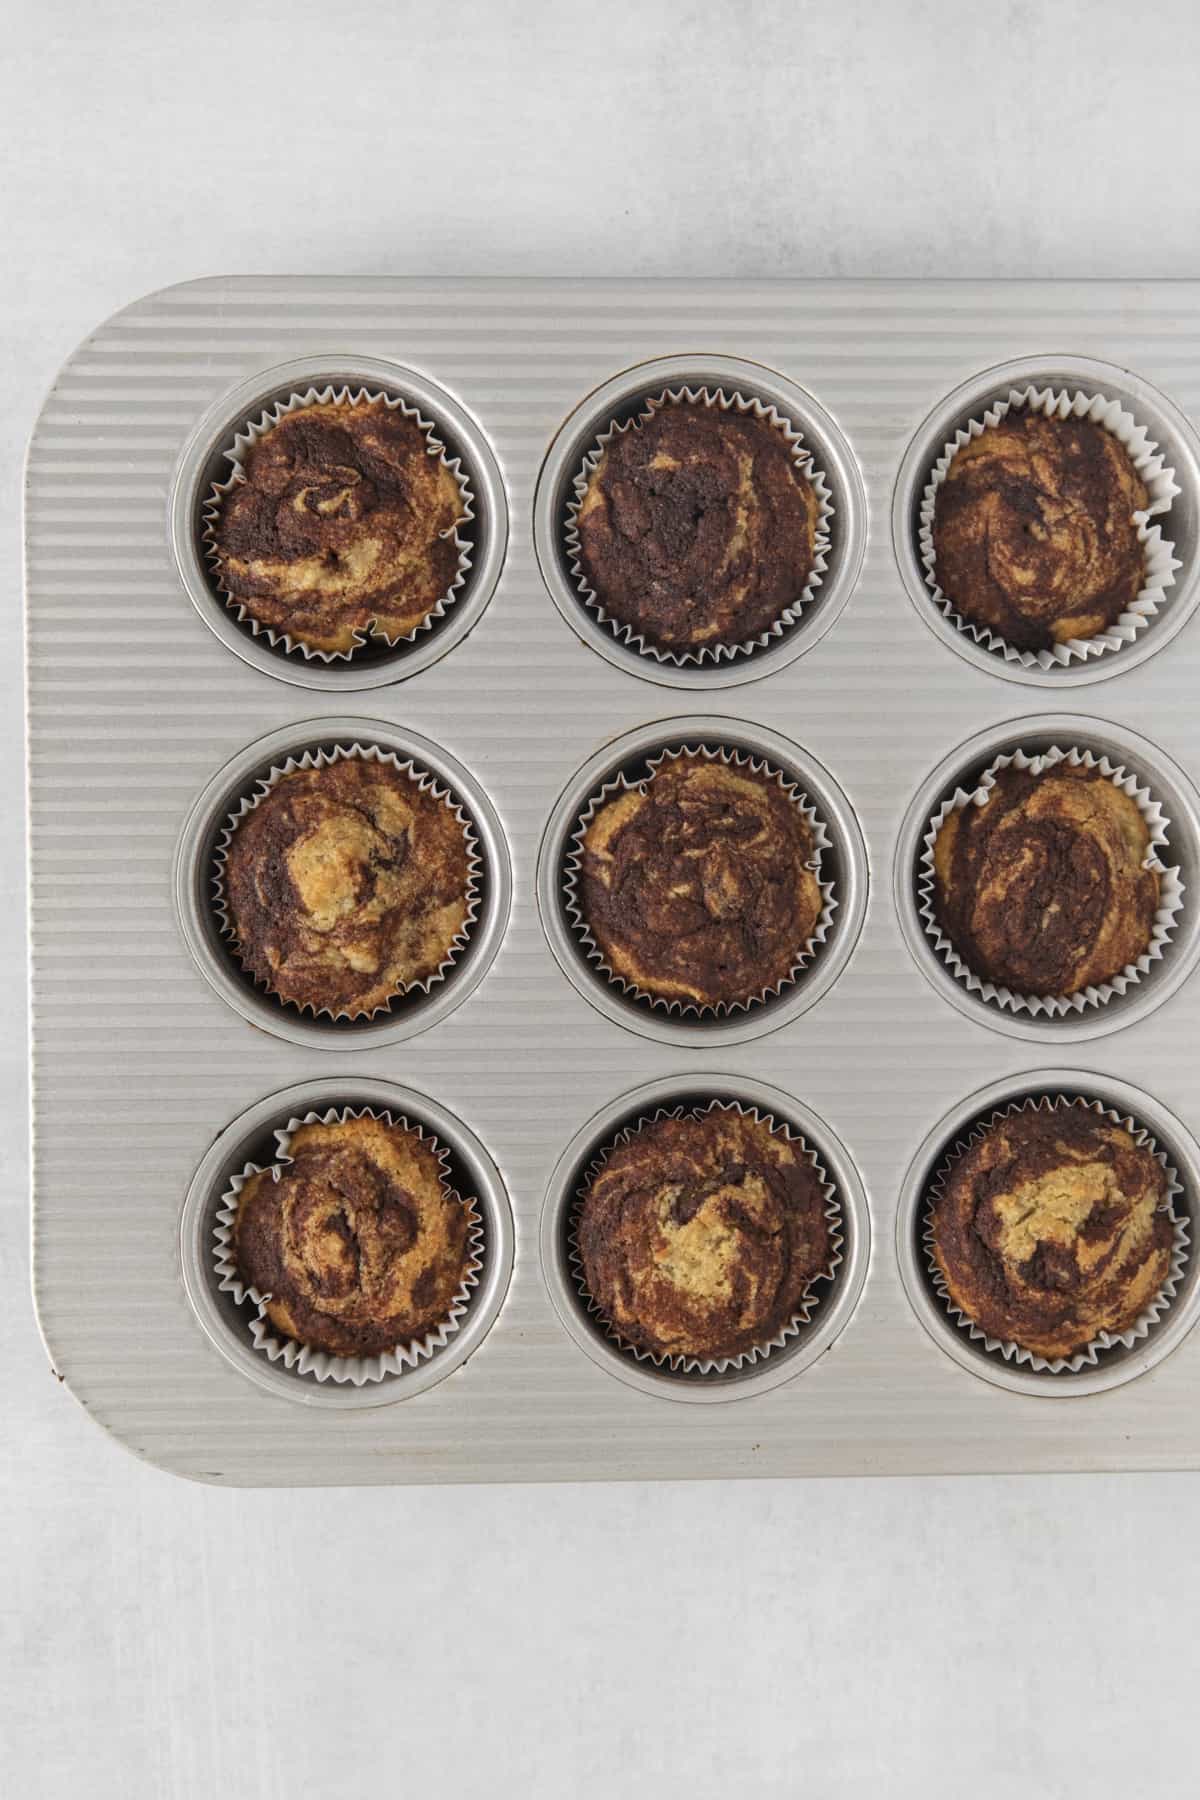 baked muffins in a muffin tin.